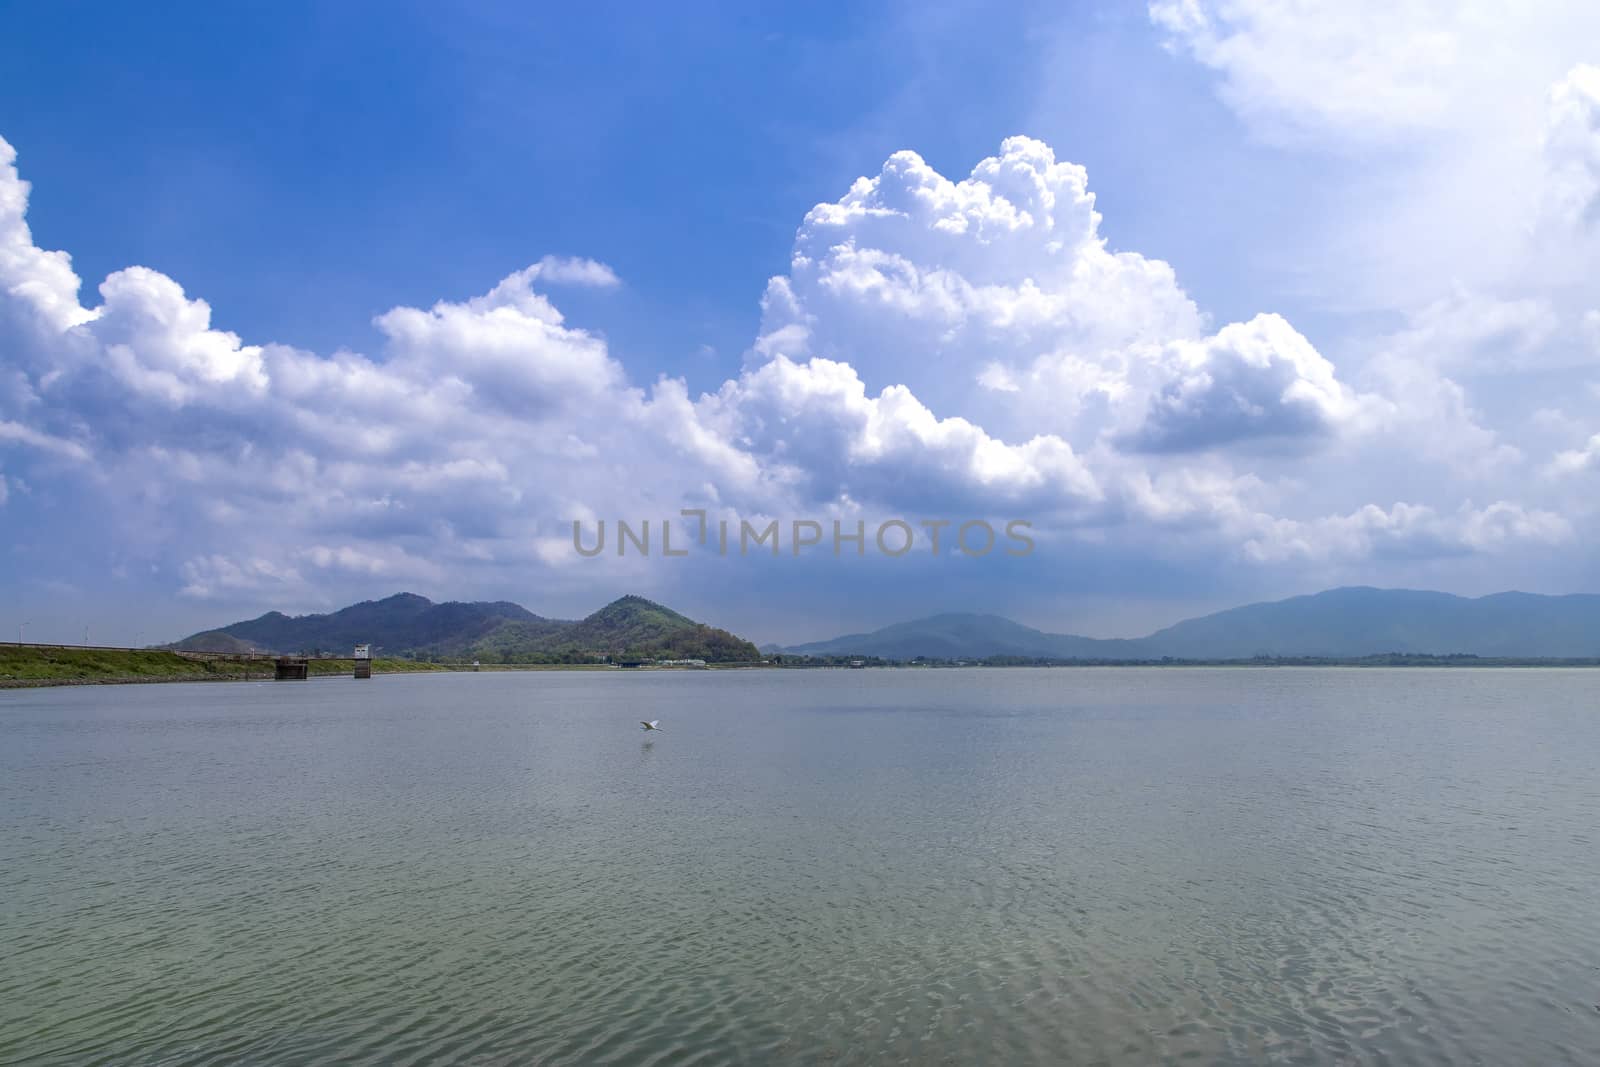 View of the lake and blue sky